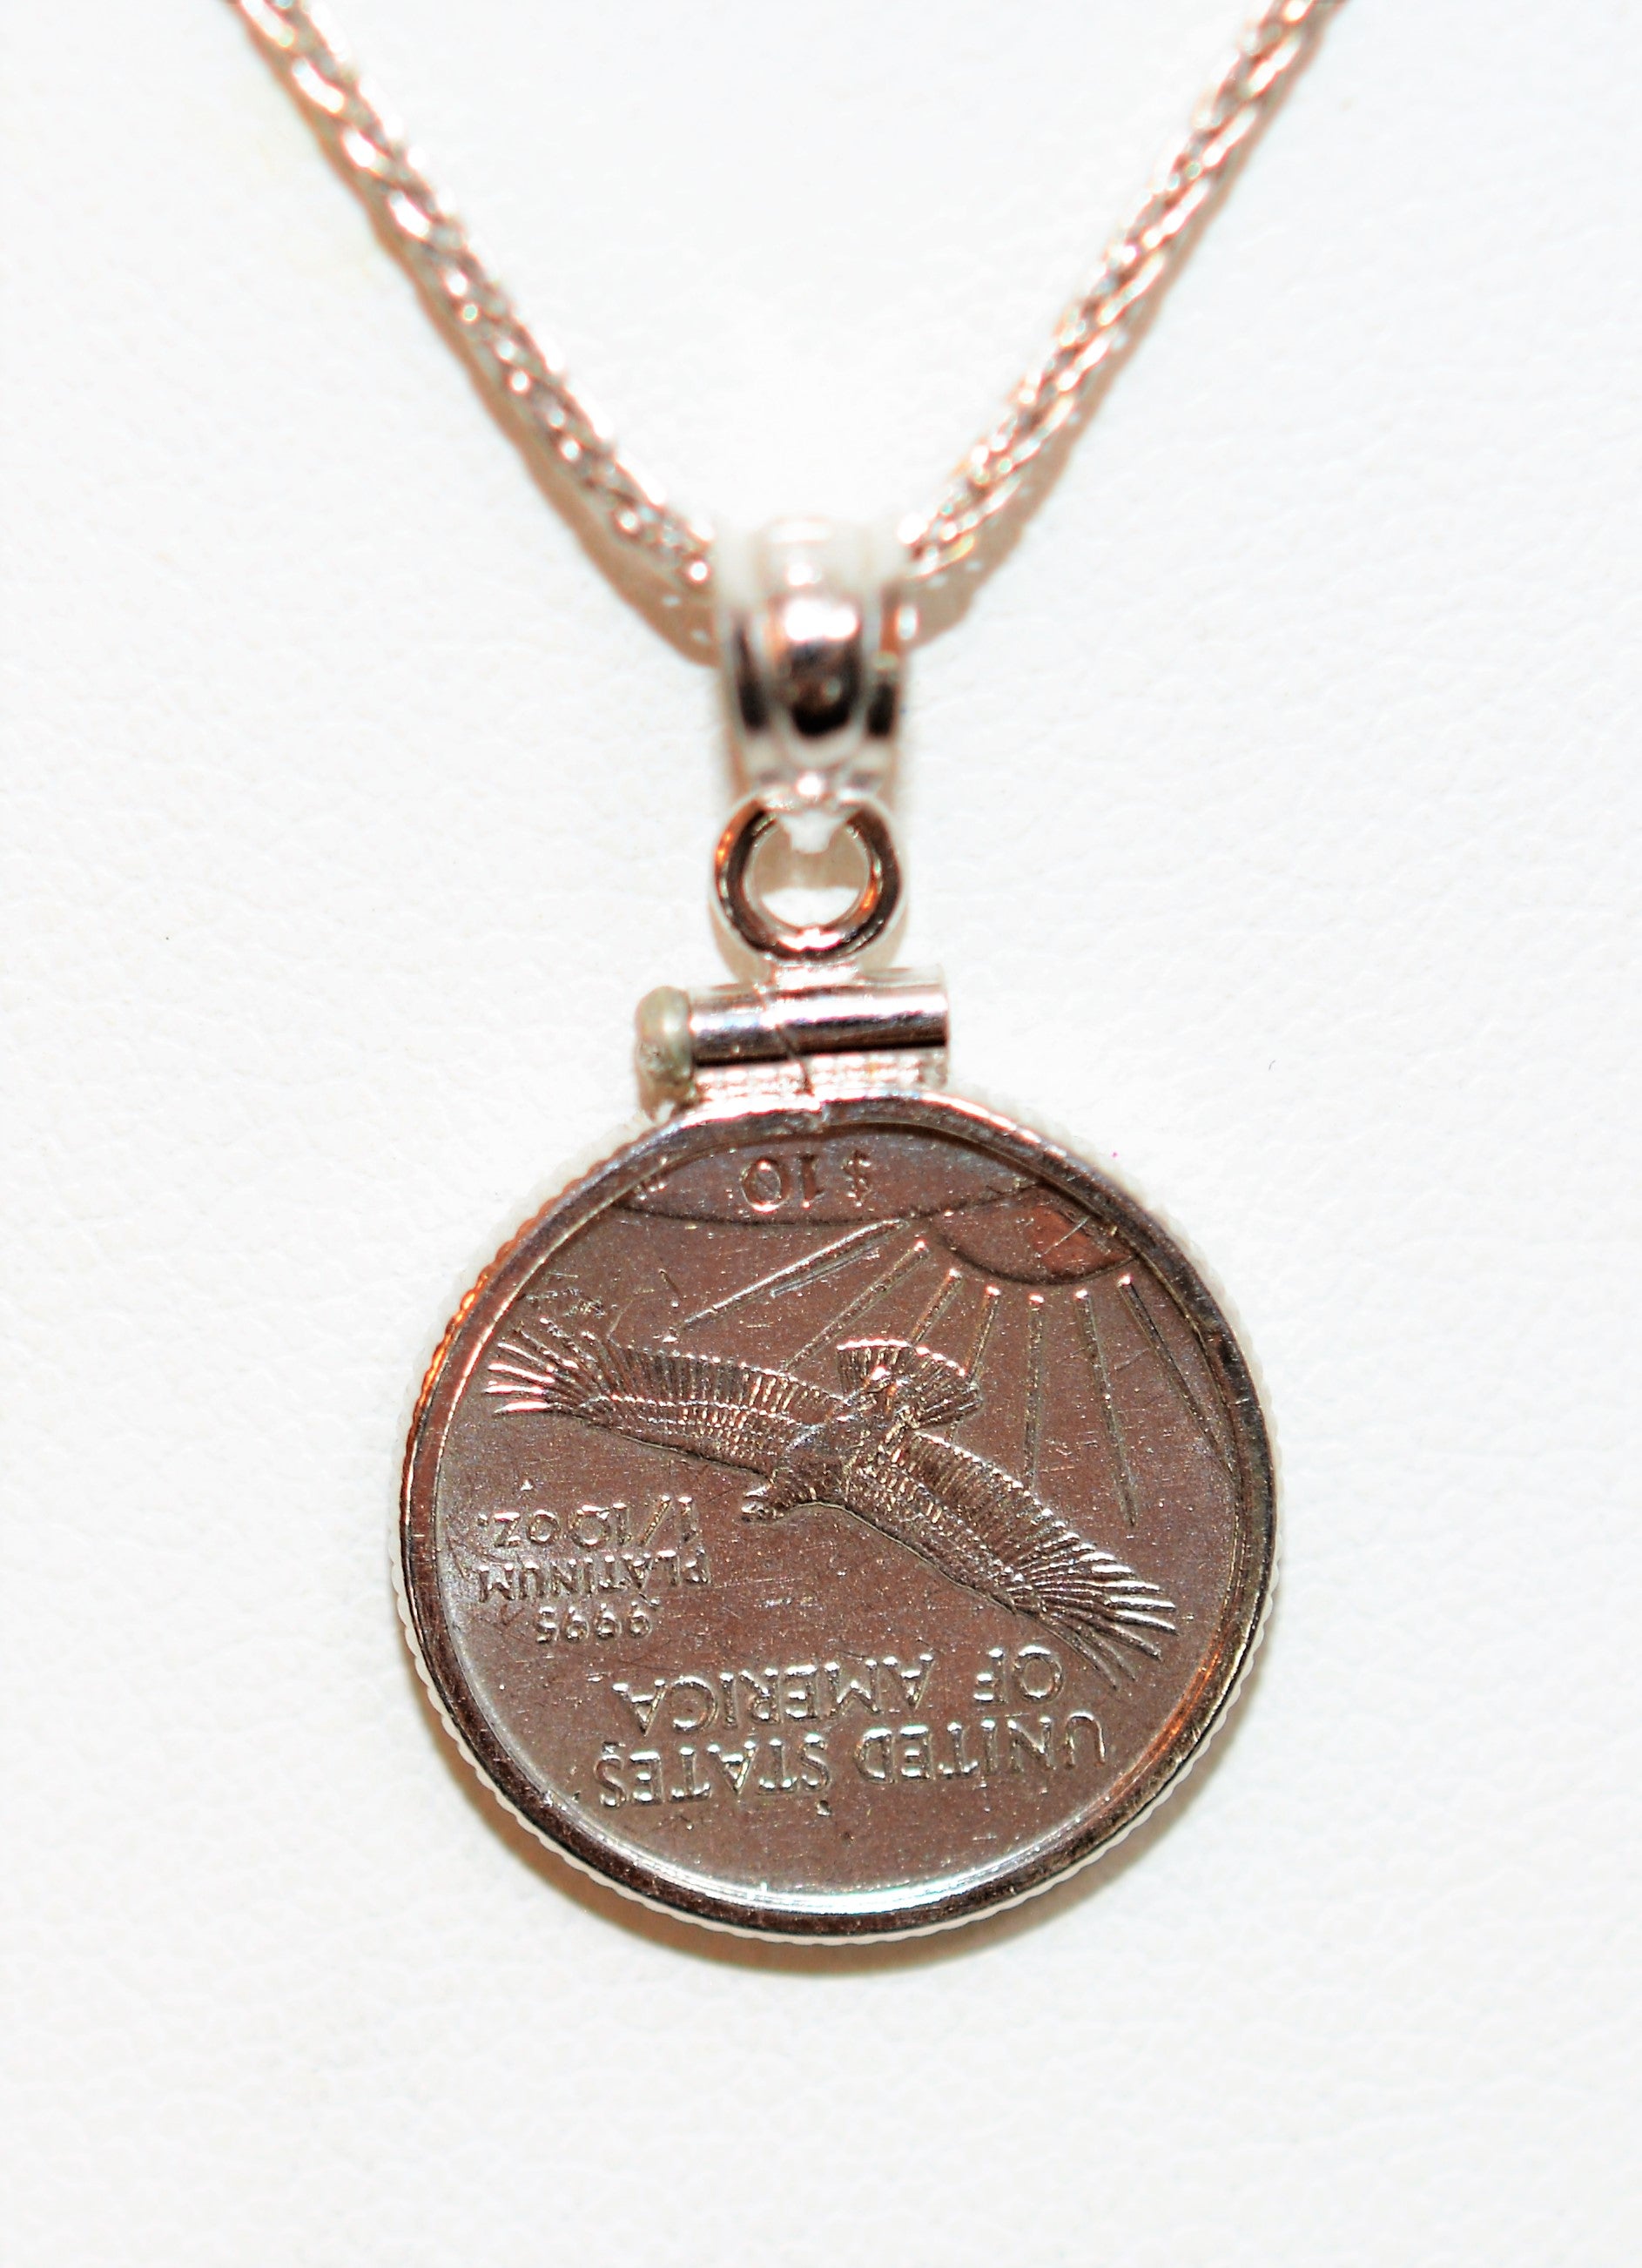 2000 American Platinum Eagle 10 Dollar Coin Necklace 14K Solid White Gold Necklace Coin Pendant Ingot Necklace Coin Jewelry Estate Jewelry